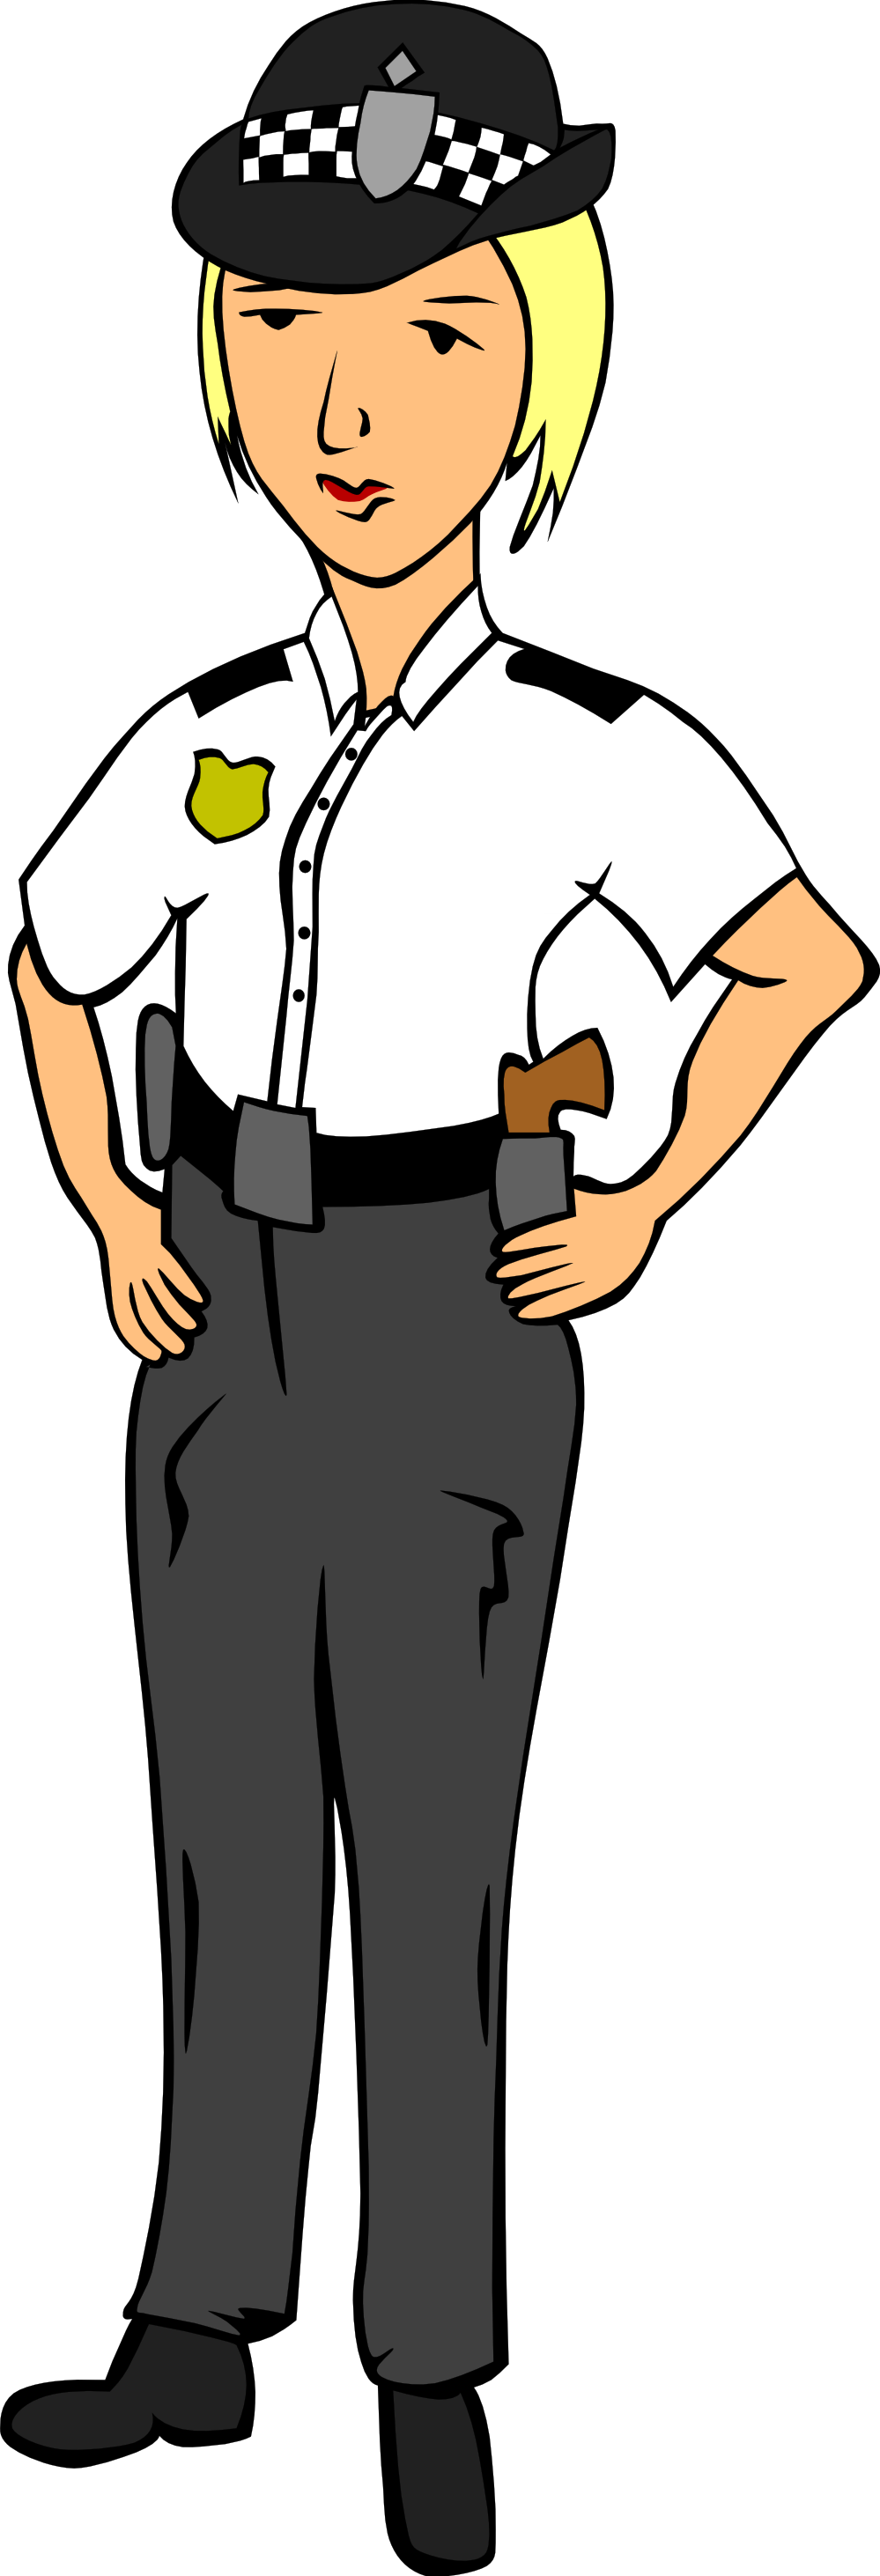 Police Officer Clipart | Free Download Clip Art | Free Clip Art ...